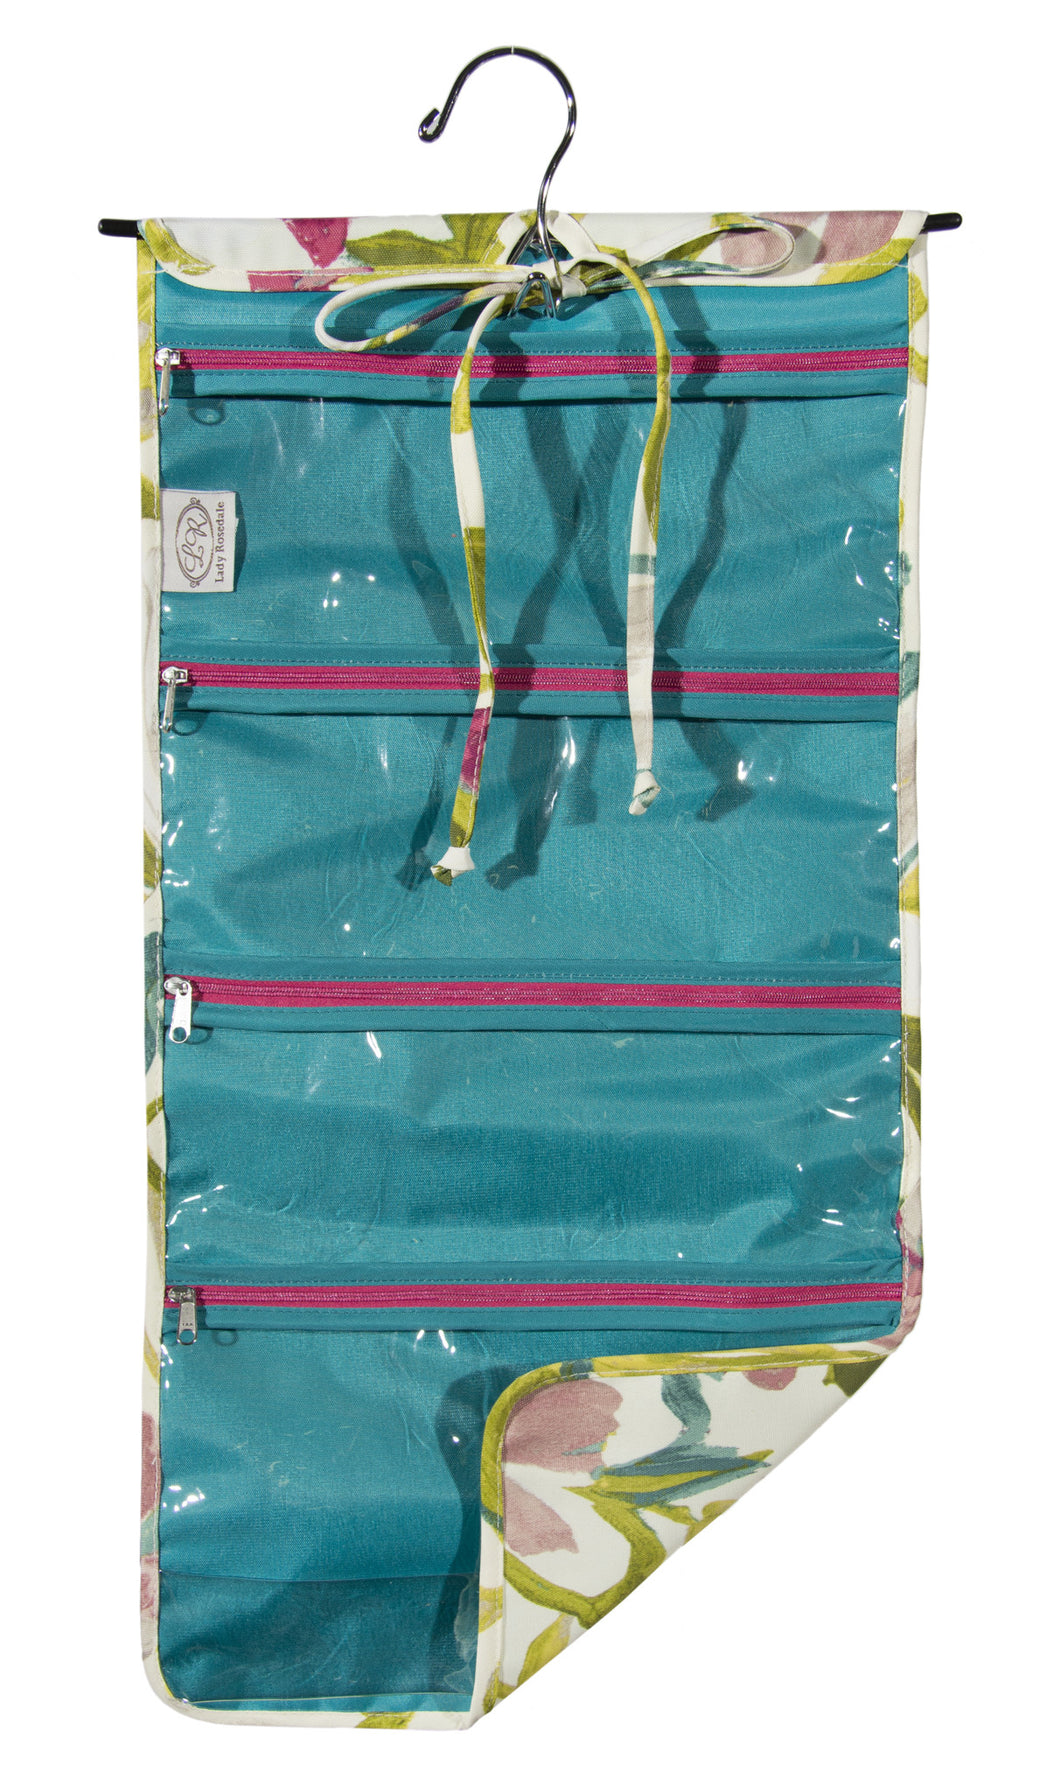 L153-3127 Hanging Cosmetic White Tea, Comes with Metal Hanger, multiple Zippered Pockets, bottom expandable Pocket, Rolls and ties for easy travelling and to keep everything contained. Part of the Cosmetic and Travel Collection 12